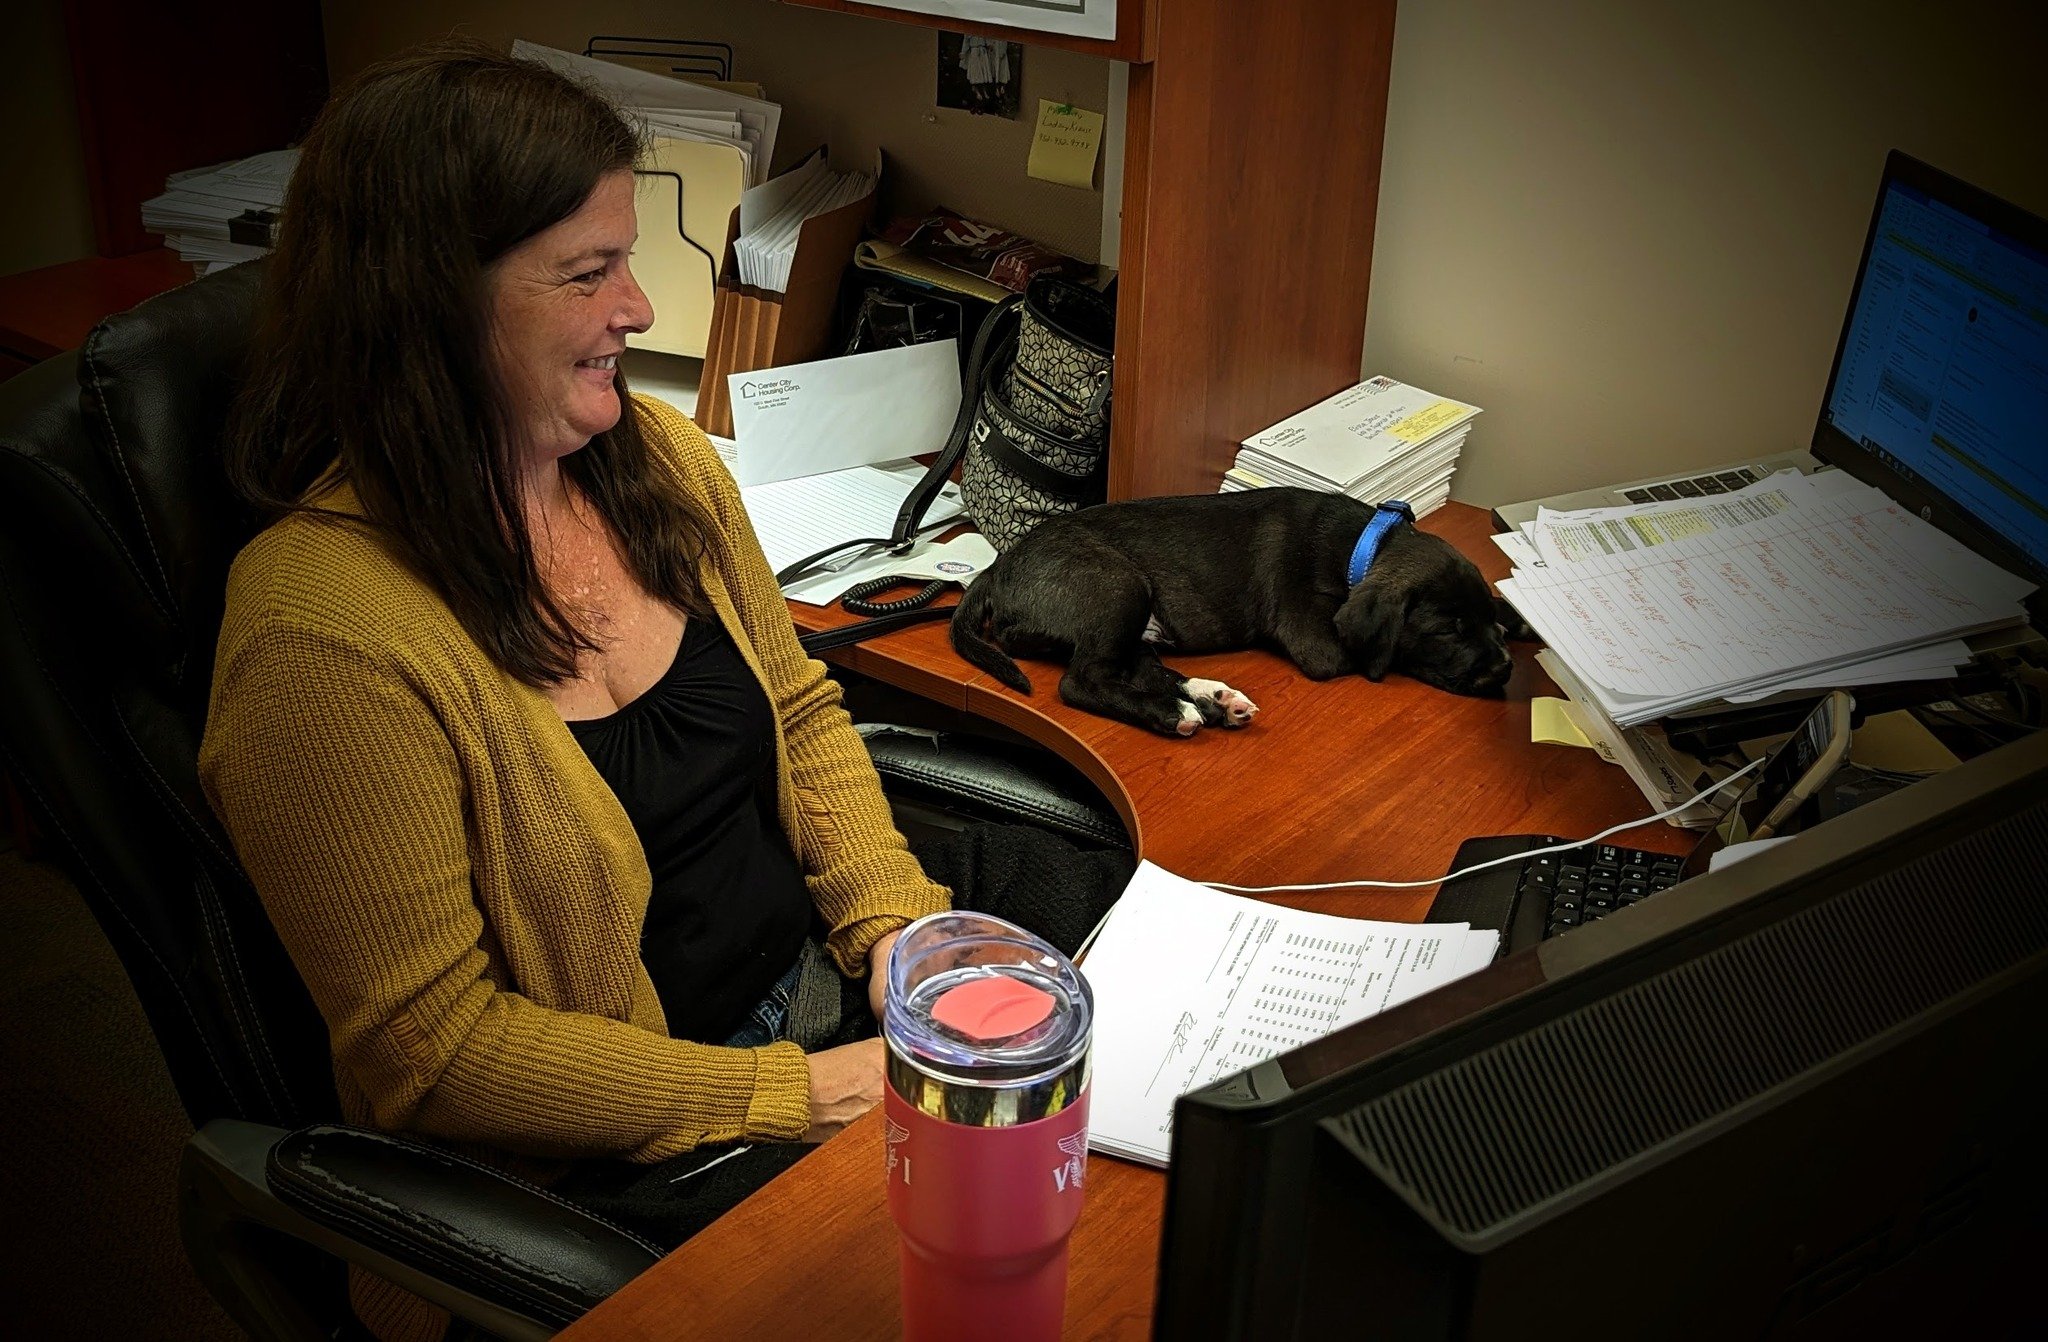 Cash, the puppy, thinks power naps are necessary before hitting those spreadsheets. We've all been there, Cash. Our awesome finance team stayed awake, though.
#AffordableHousing #puppyoftheday #puppies #duluthmn #mondaymood